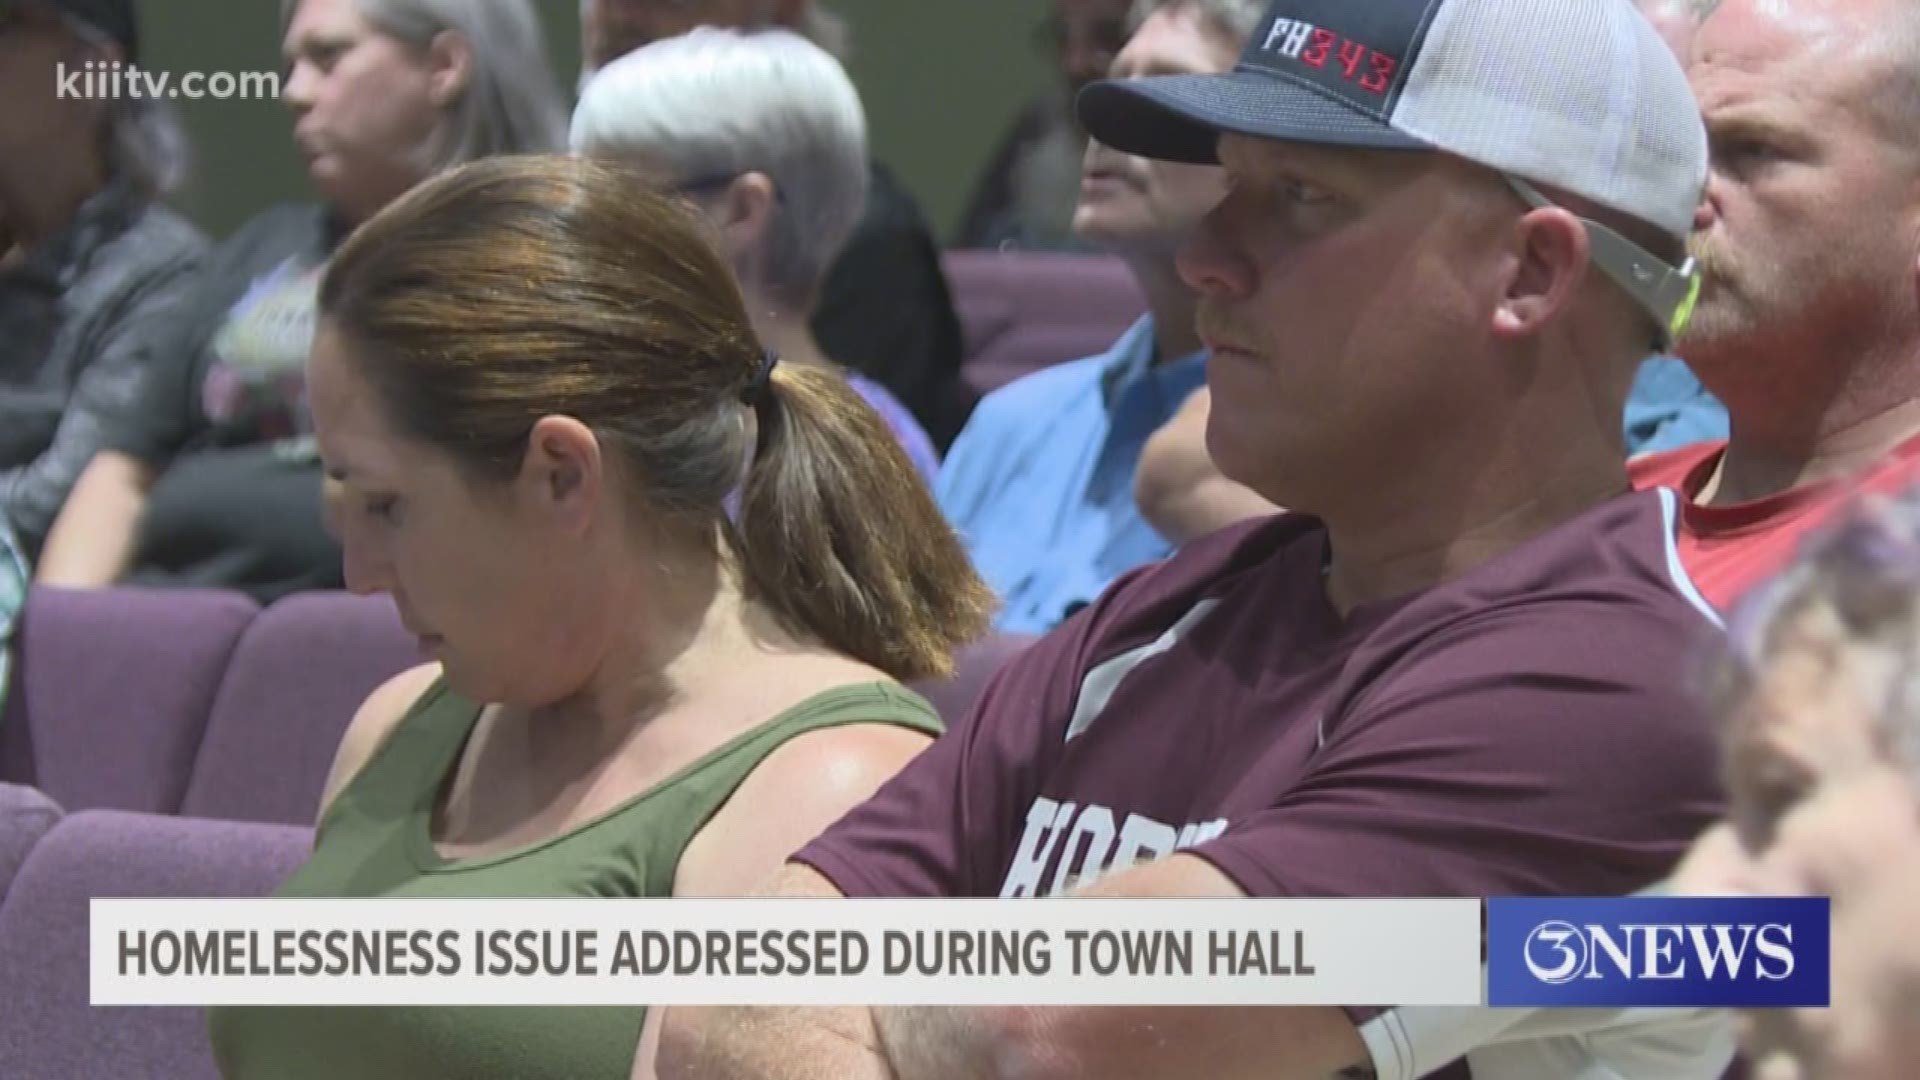 One of the biggest problems that were brought up several times at the meeting was the issue of homelessness.